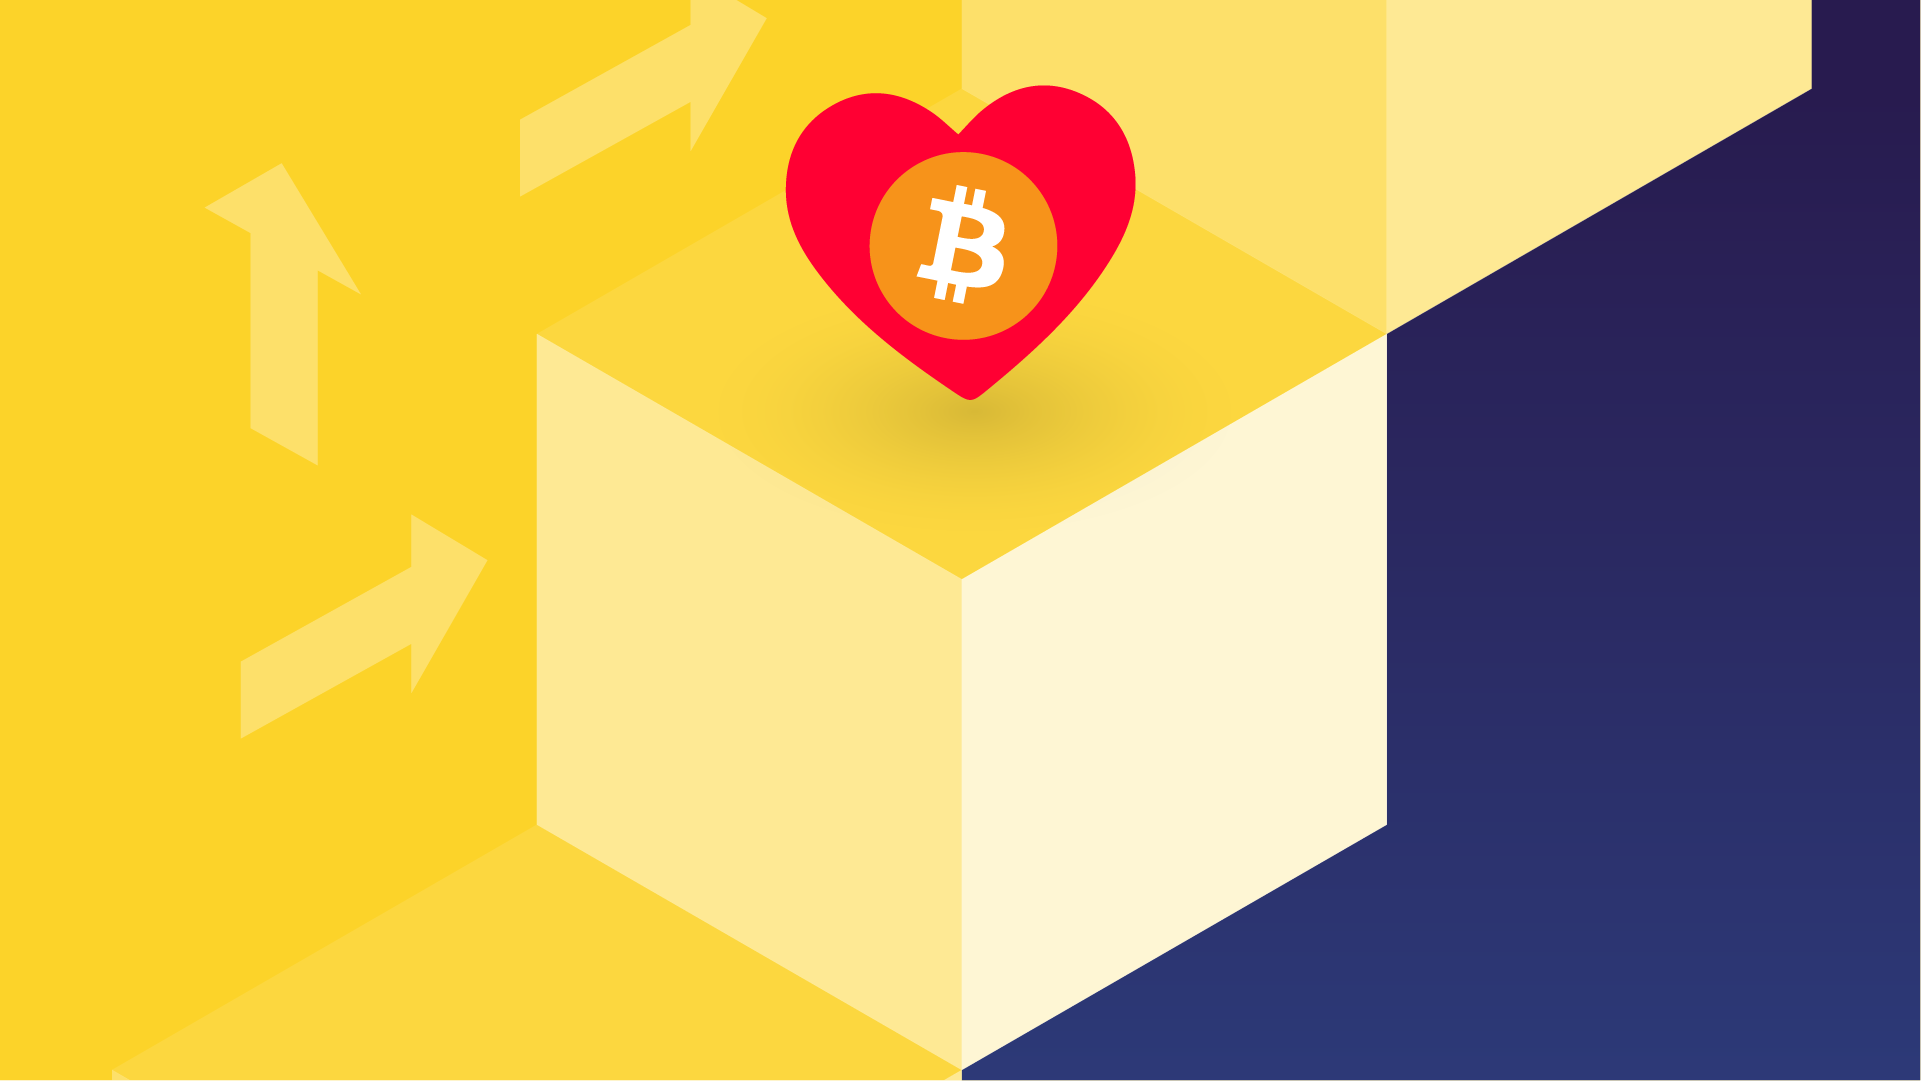 RESOURCES-How to Accept Bitcoin Donations | The Giving Block